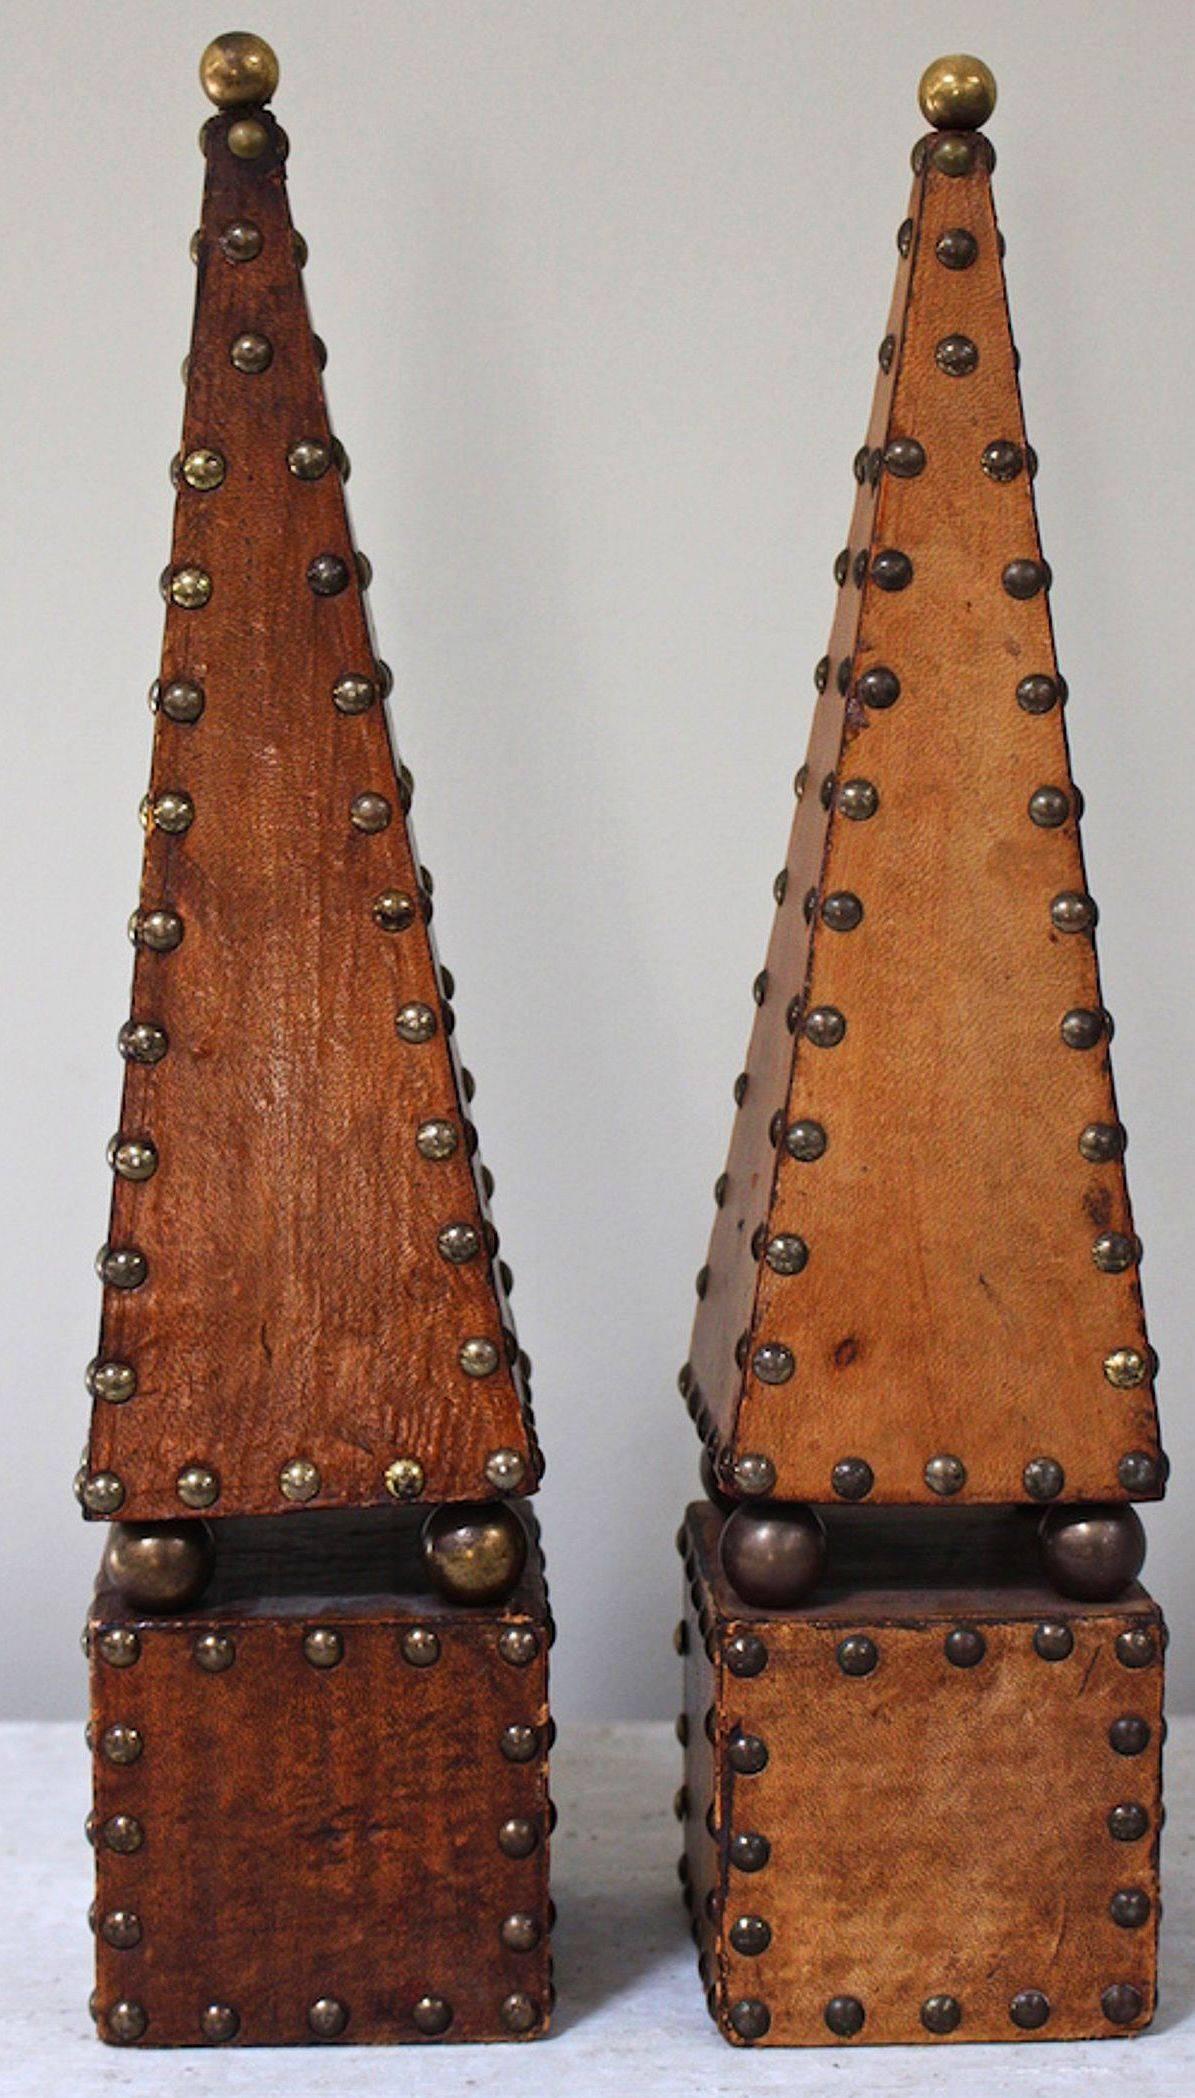 A fine pair of English decorative obelisks or desk-top or mantle sculptures, in studded leather, each featuring a tall architectural pyramid obelisk set upon a square base, topped with a brass ball finial.

Priced as a pair - $2895 the pair